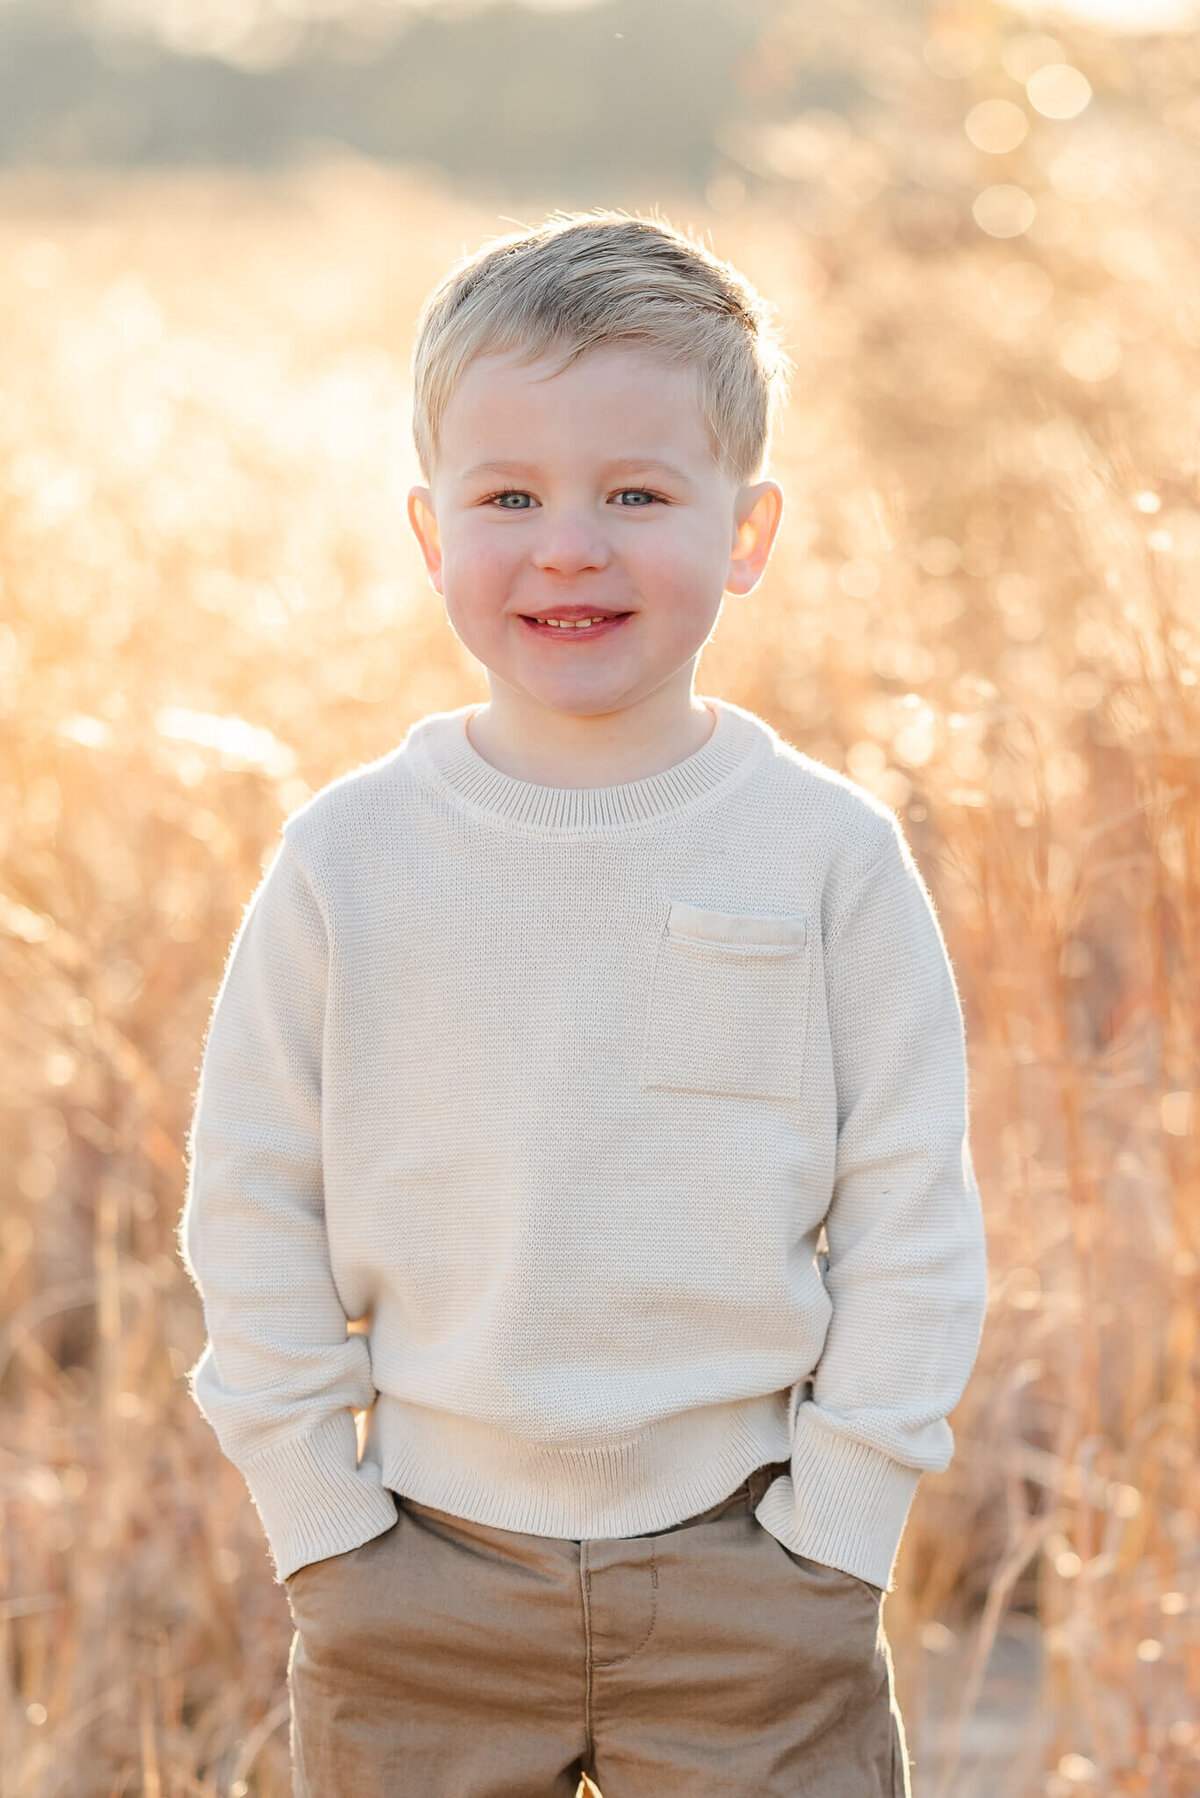 A young boy, wearing khakis and a long sleeve off-white shirt, puts his hands in his pockets and smiles. Photo captured in the Outer Banks by Justine Renee Photography.